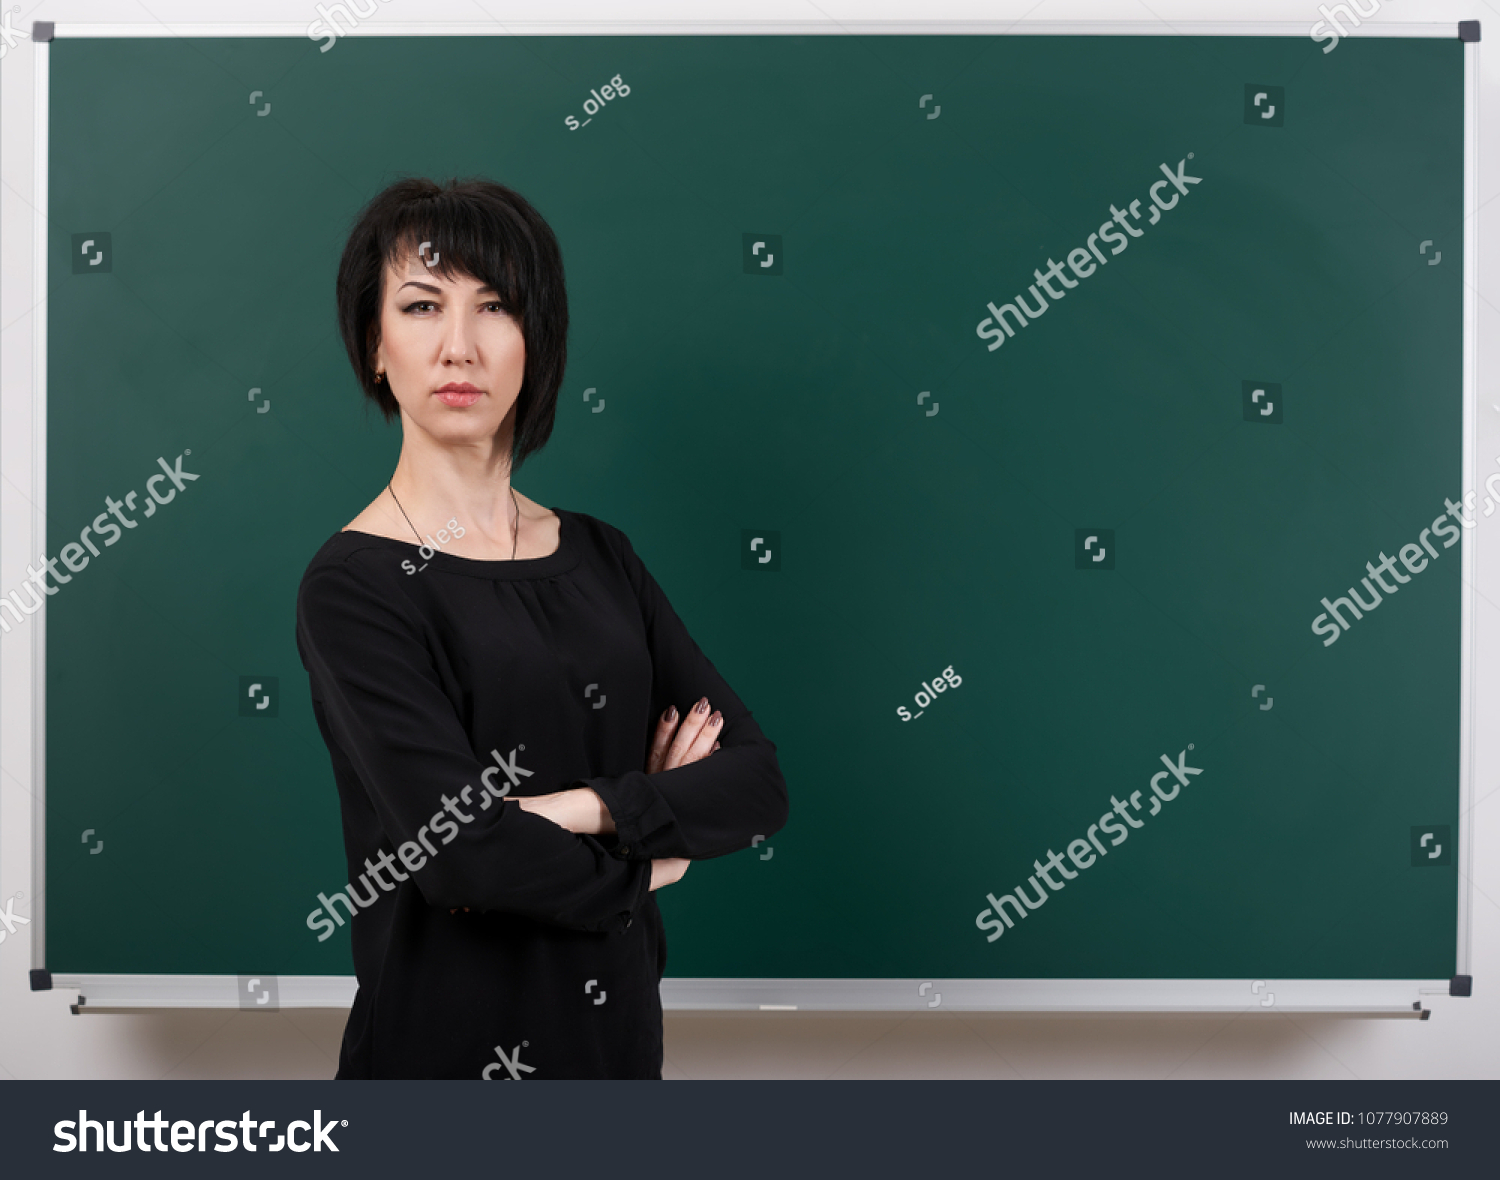 strict teacher posing by chalk Board, learning concept, green background, Studio shot #1077907889